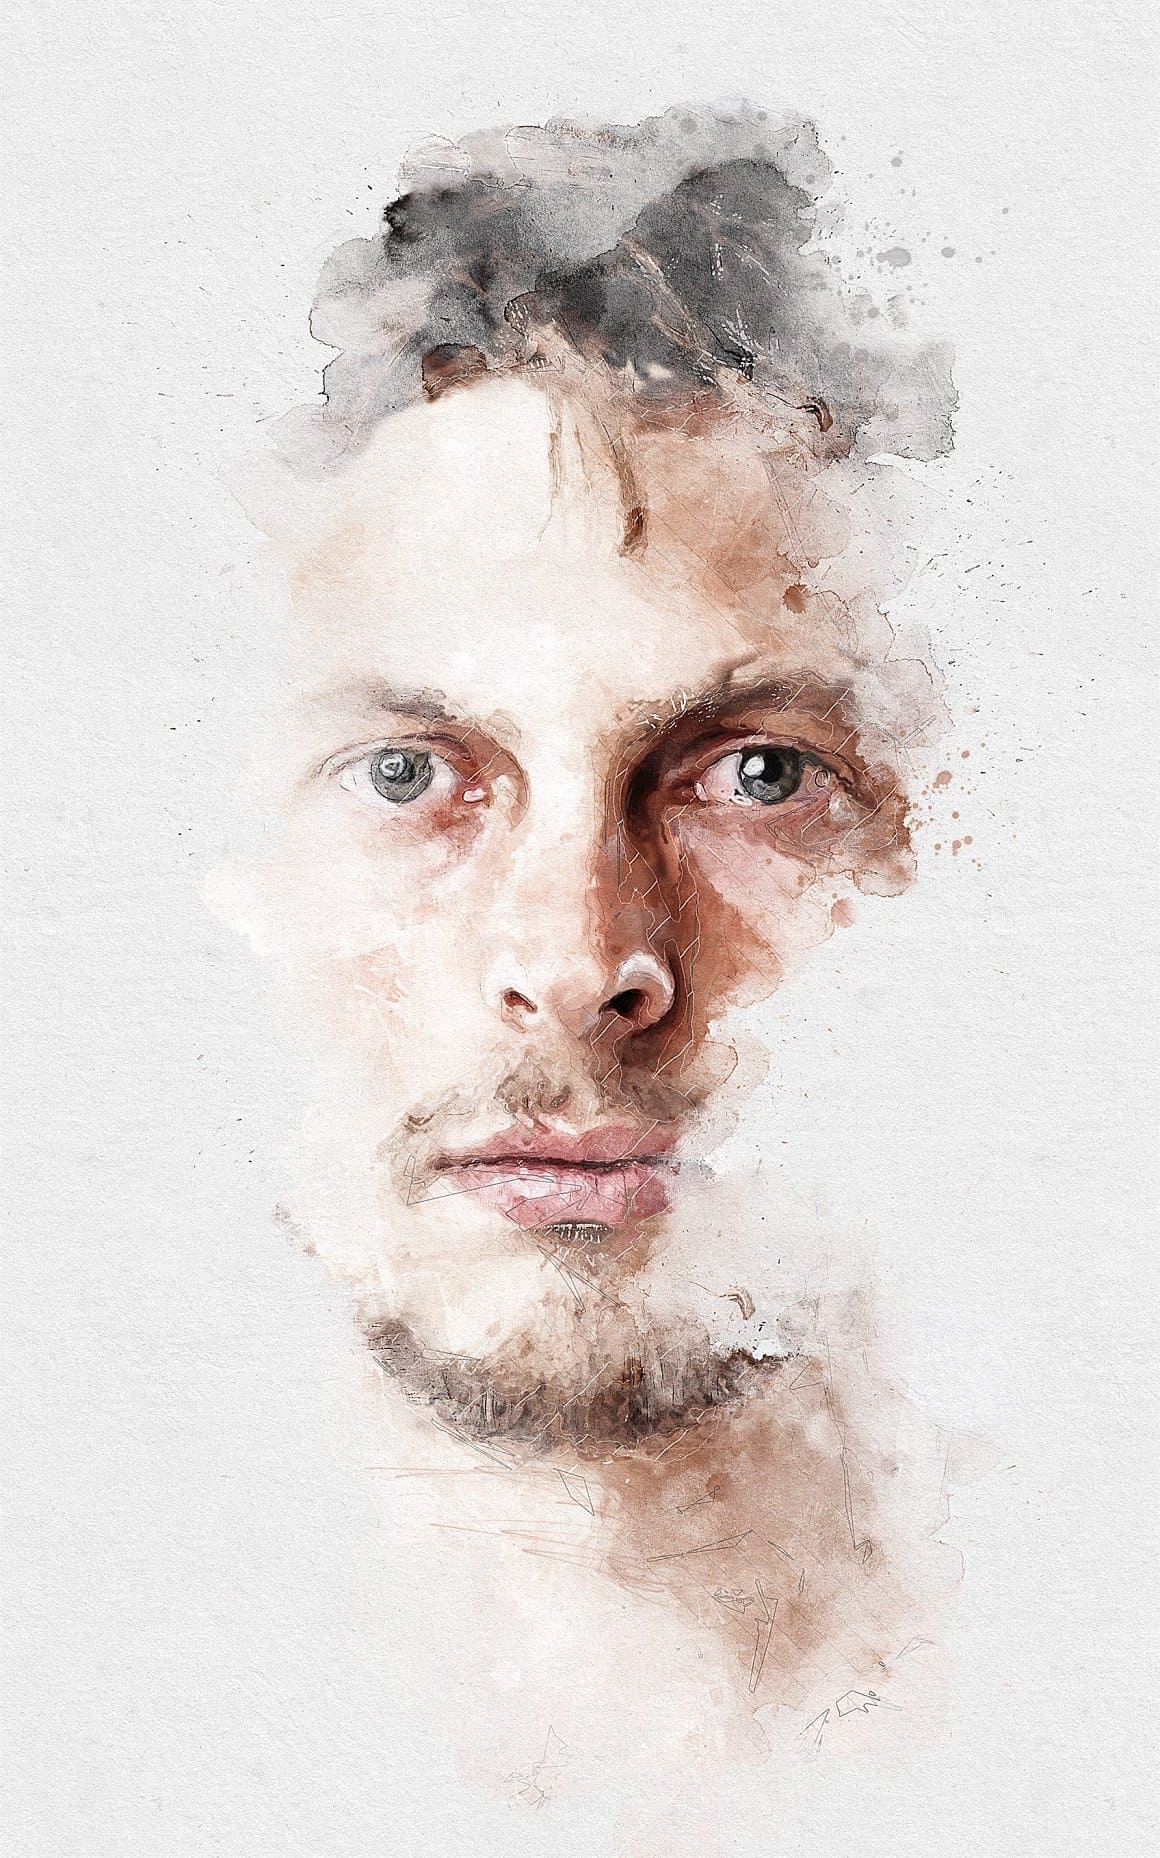 A watercolor image of a man with gray eyes created in Photoshop.